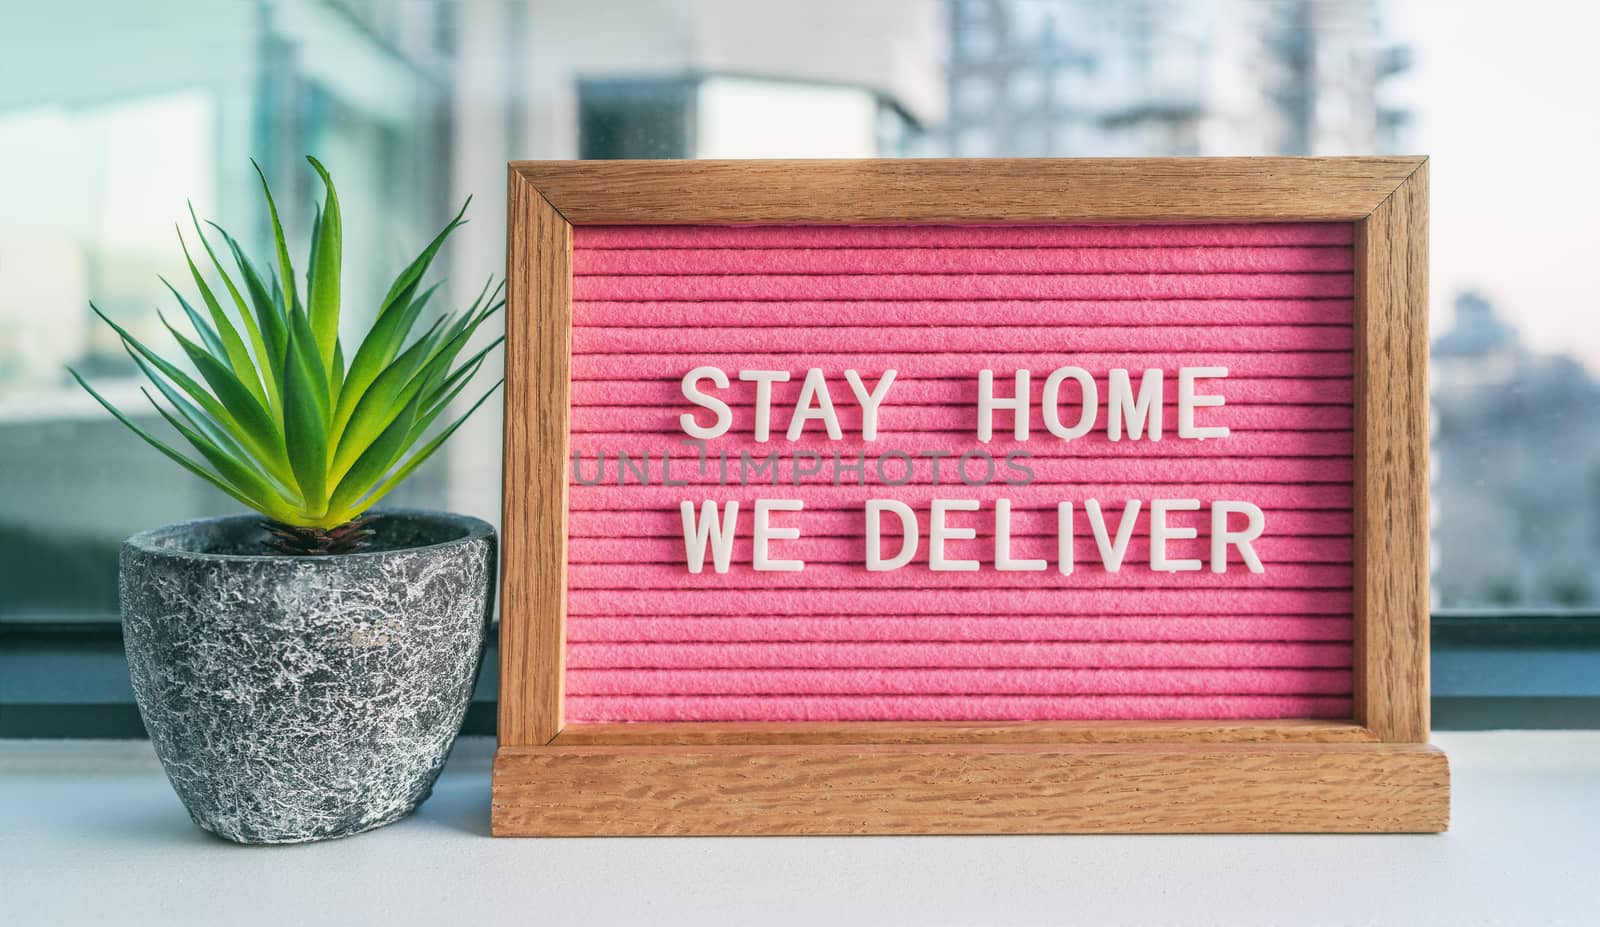 COVID-19 STAY HOME WE DELIVER Coronavirus social distancing restaurant business message sign with text offering online delivery to home, staying inside. Pink felt board with plant.